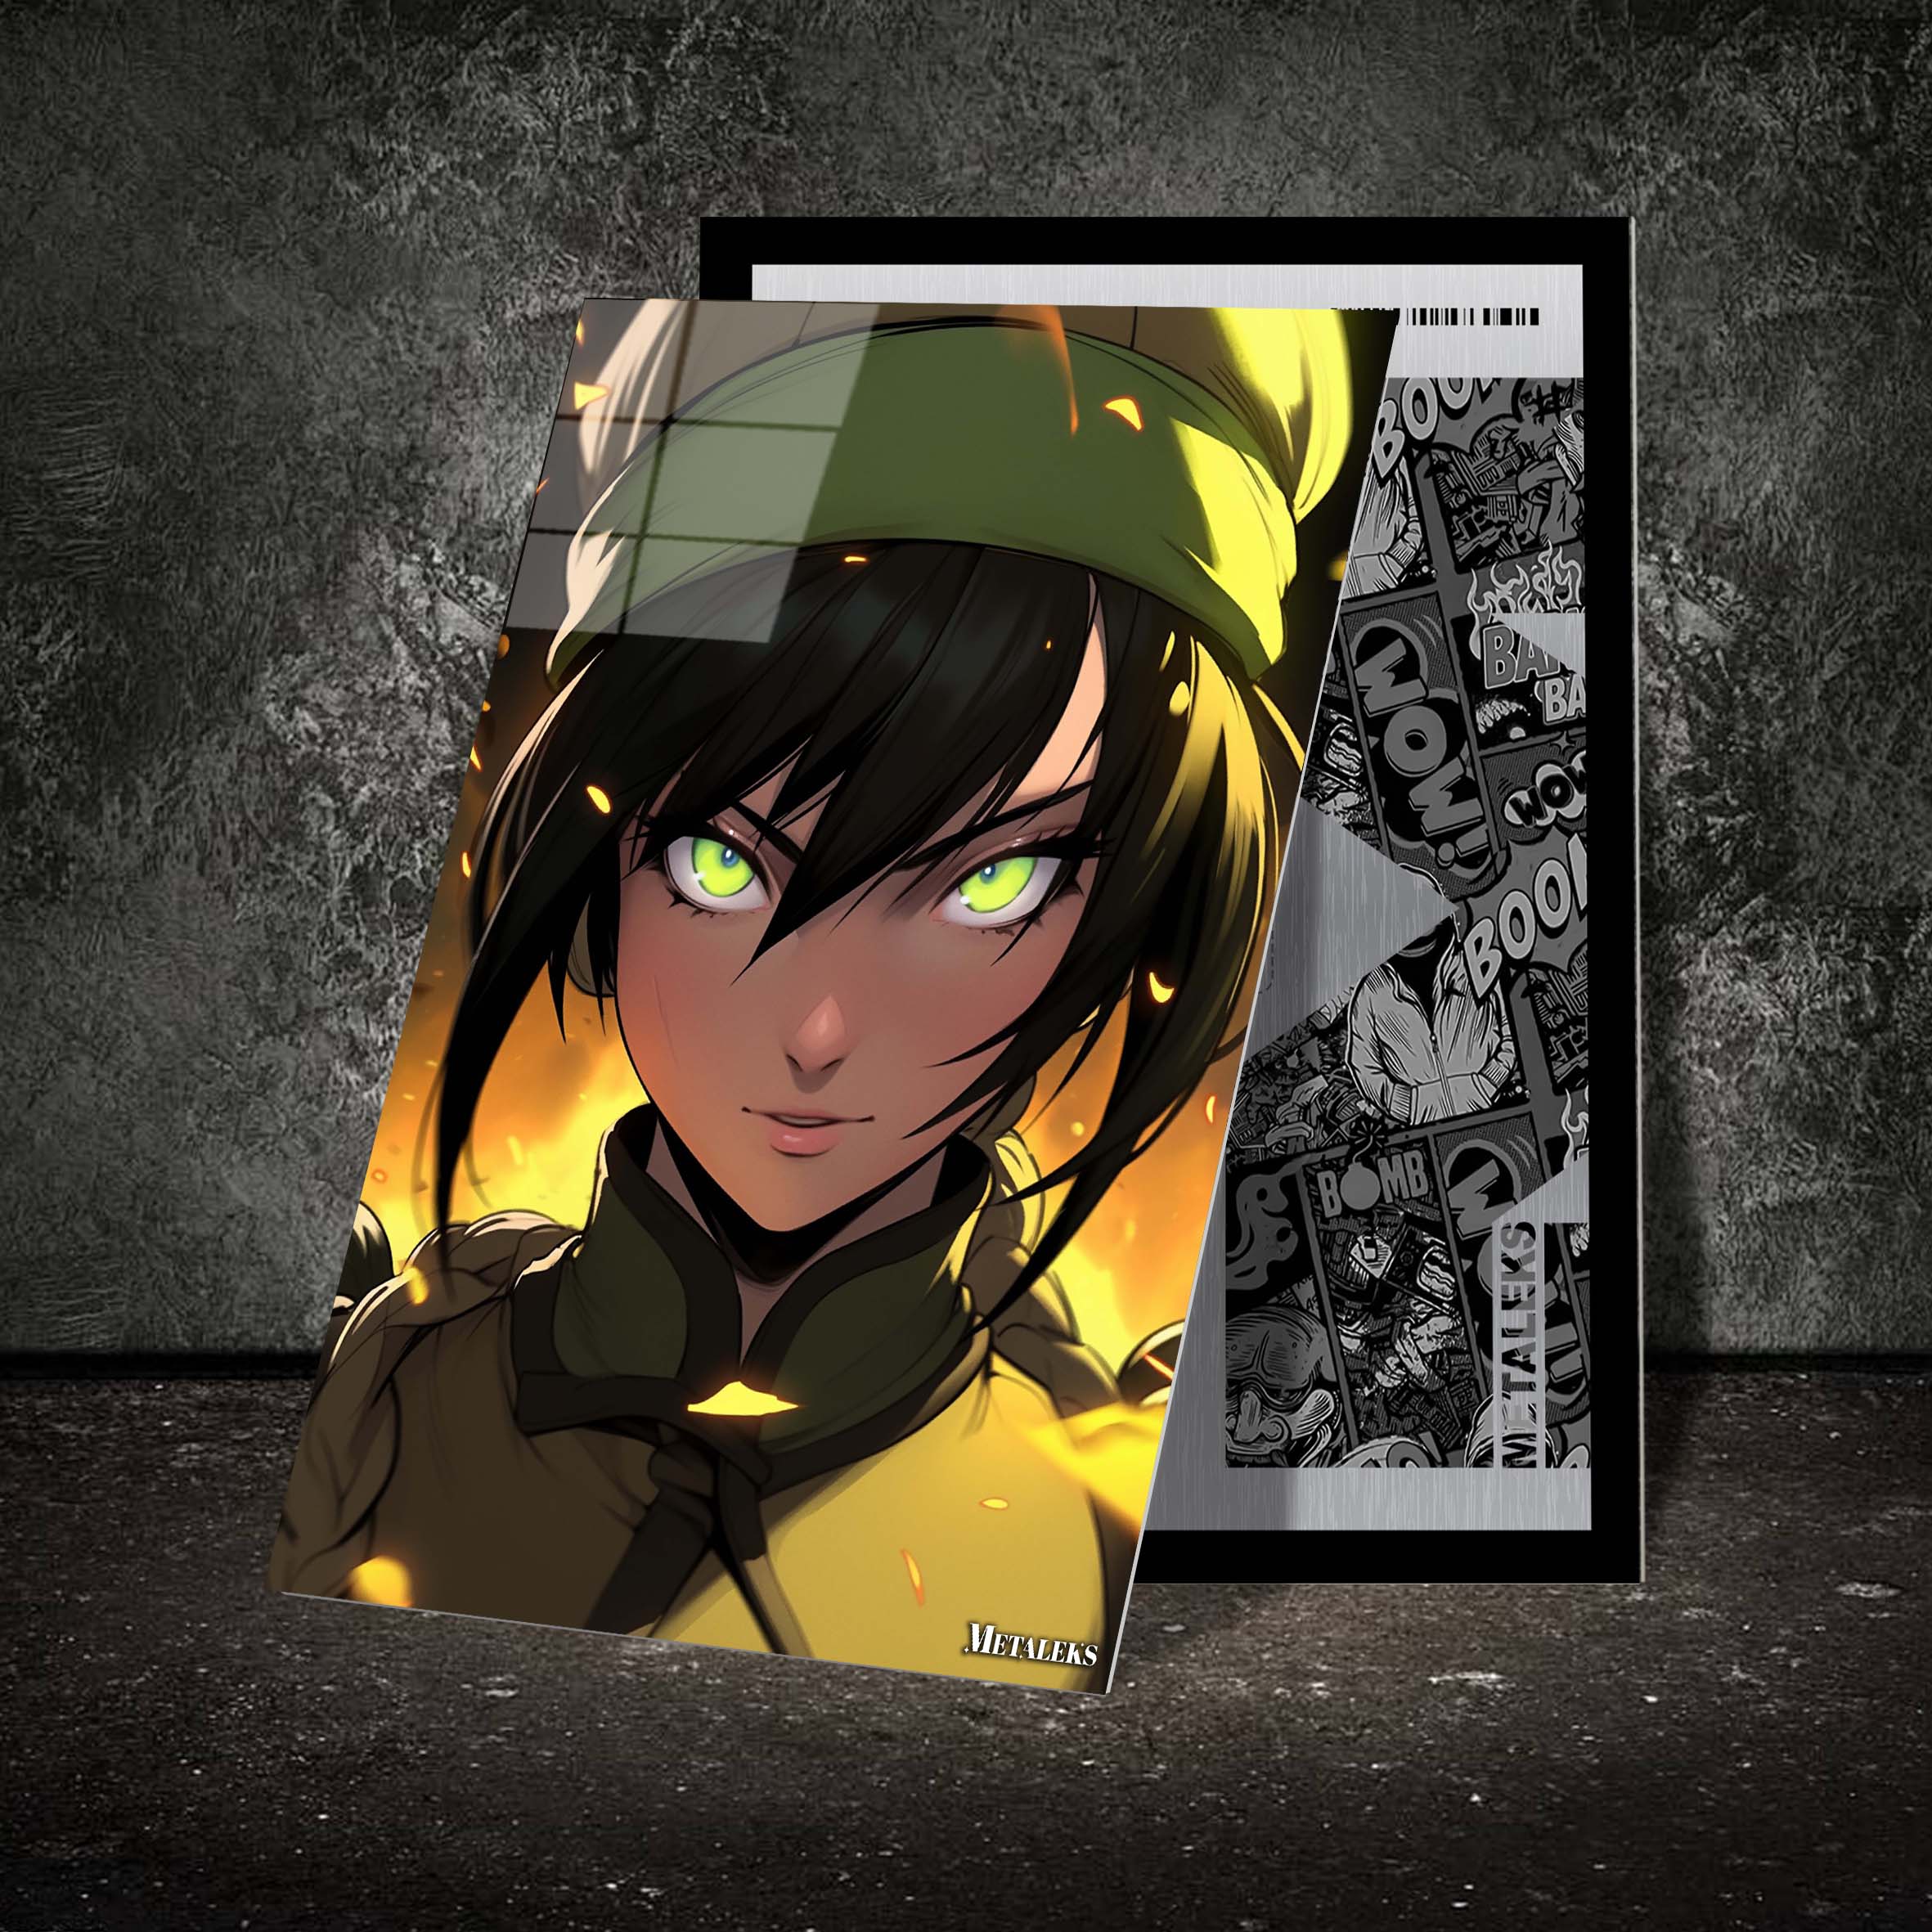 Blind Bandit's Legacy_ Toph's Journey Beyond the Arena-designed by @theanimecrossover